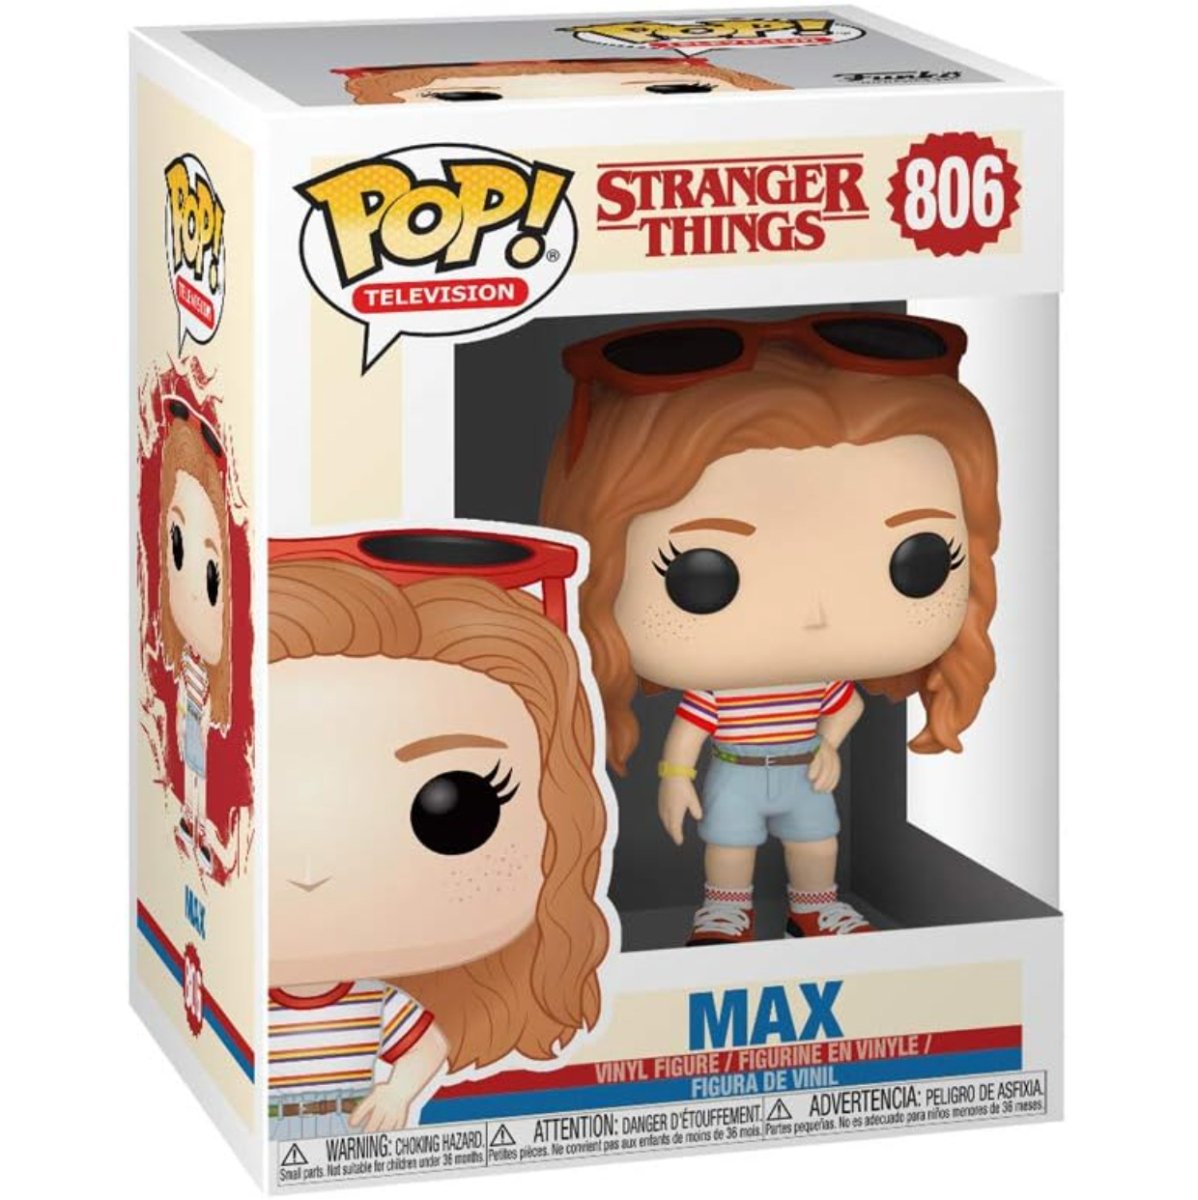 Stranger Things - Max [Mall Outfit] #806 - Funko Pop! Vinyl Television - Persona Toys